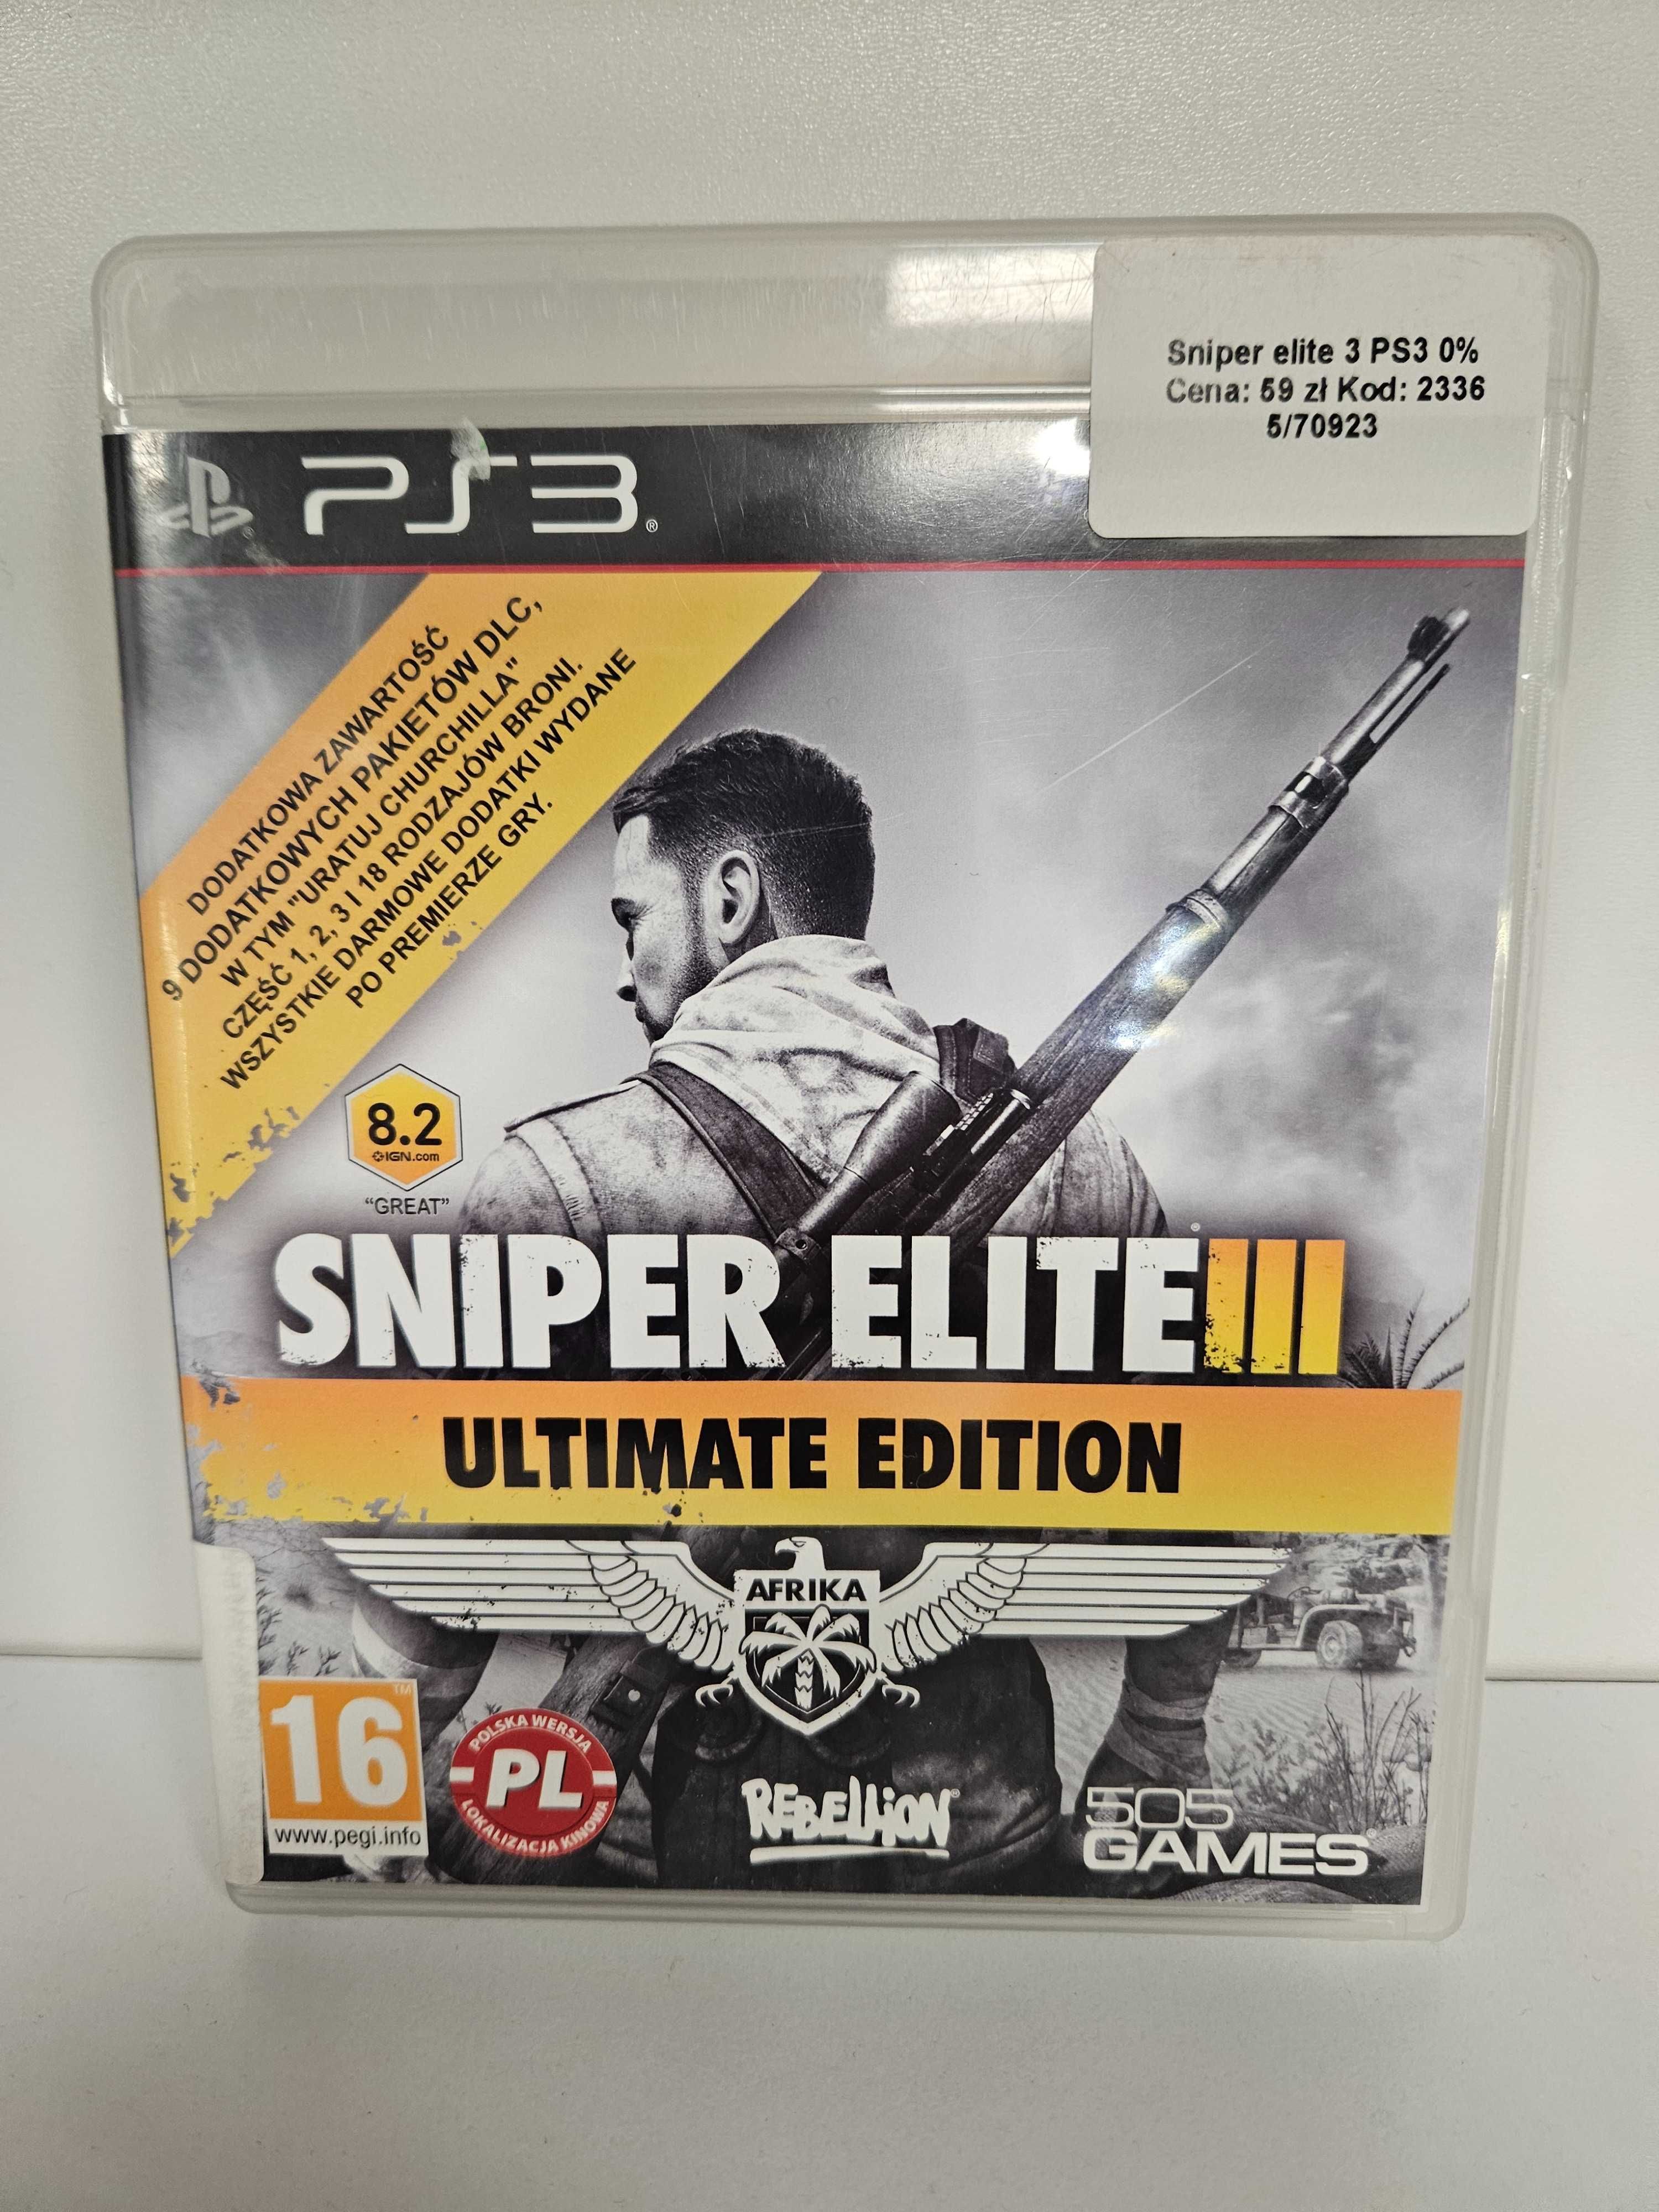 Sniper Elite III Ultimate Edition PS3 - As Game & GSM 2336